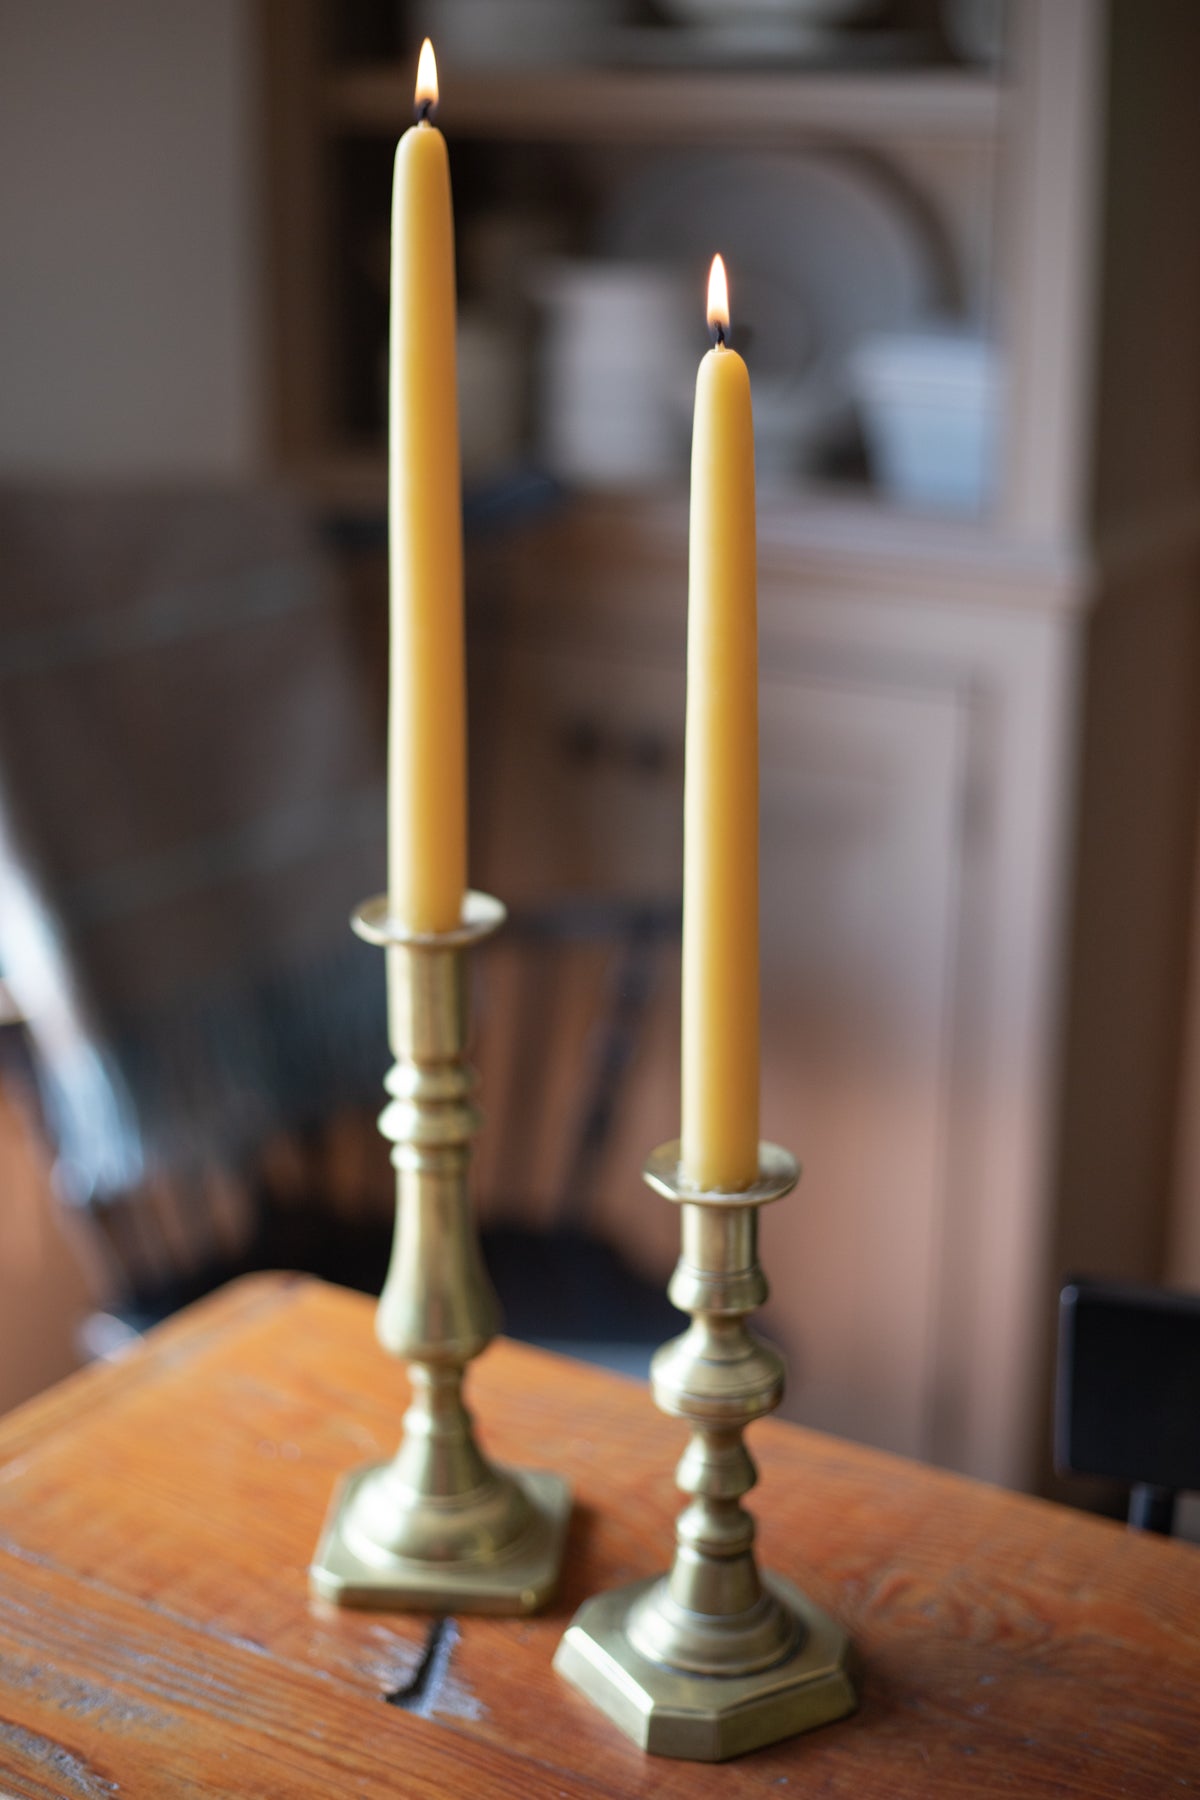 Beeswax Holiday Candles & Holders – Bluecorn Candles